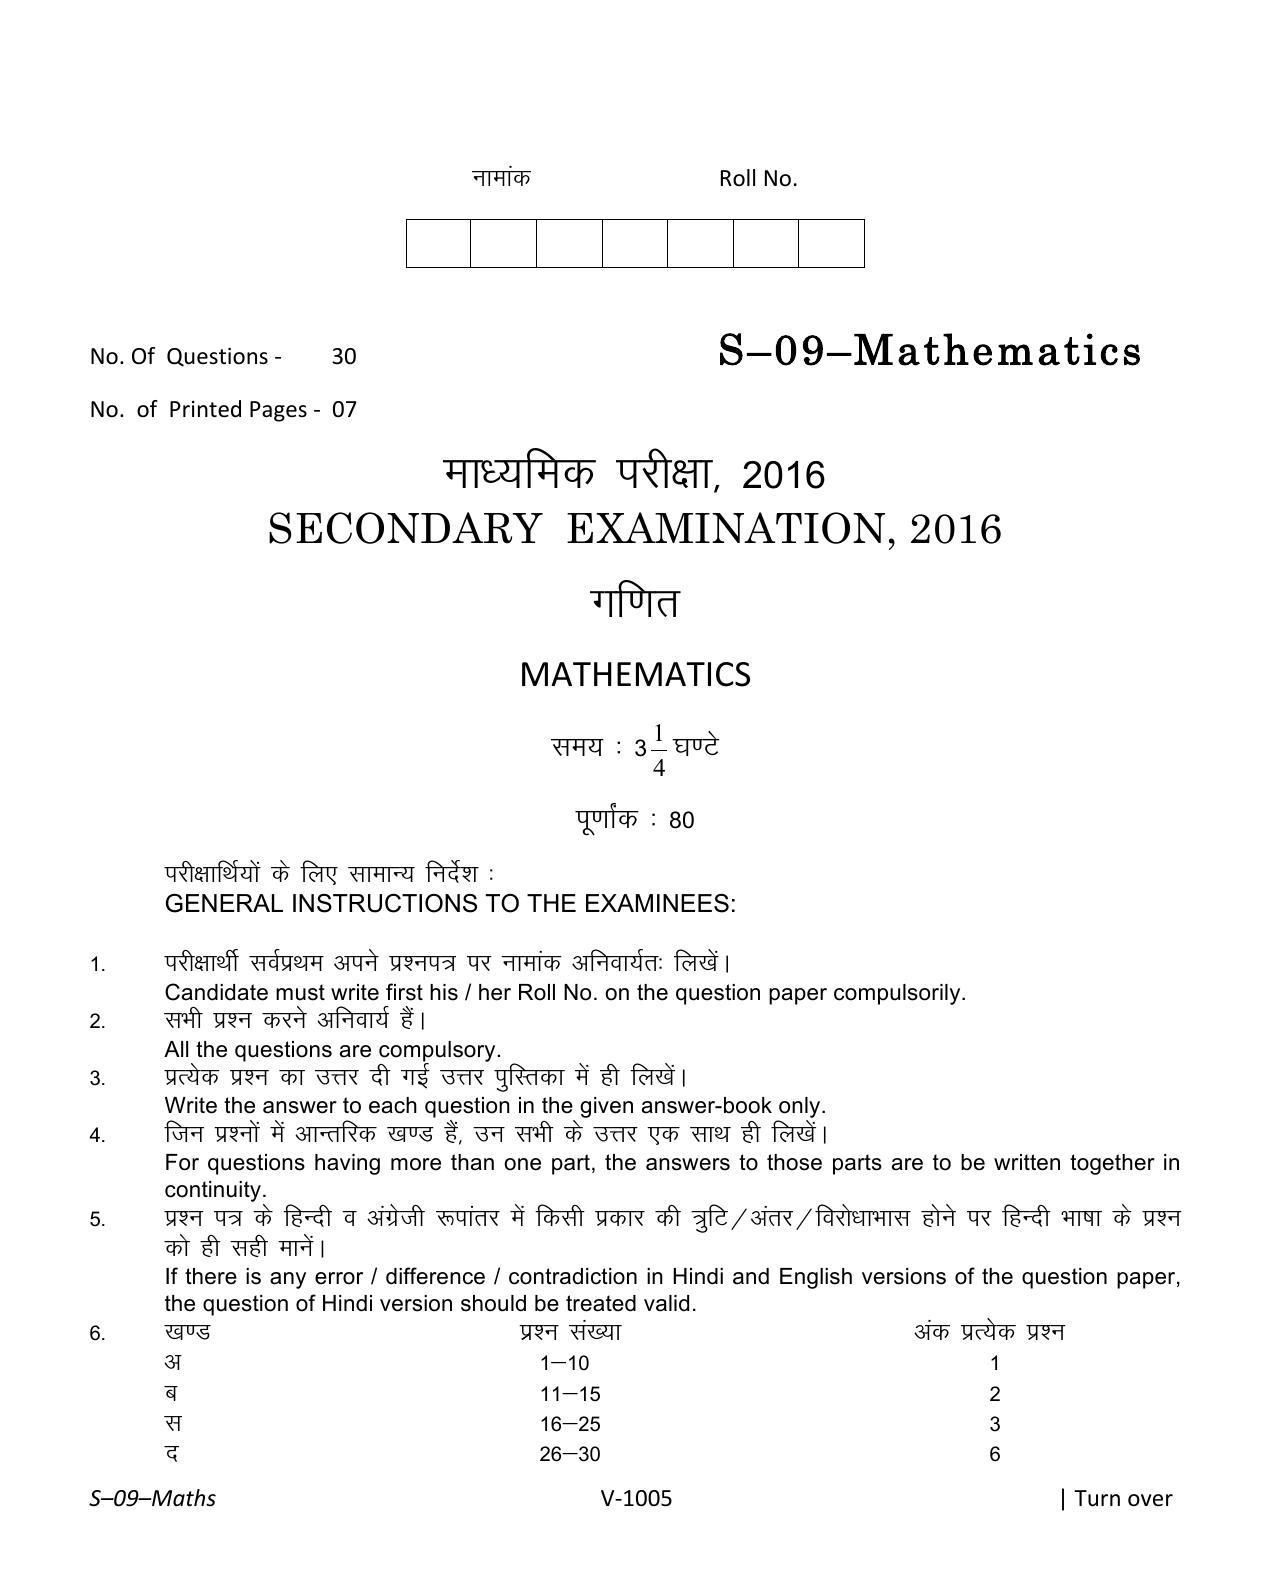 RBSE Class 10 Mathematics 2016 Question Paper - Page 1